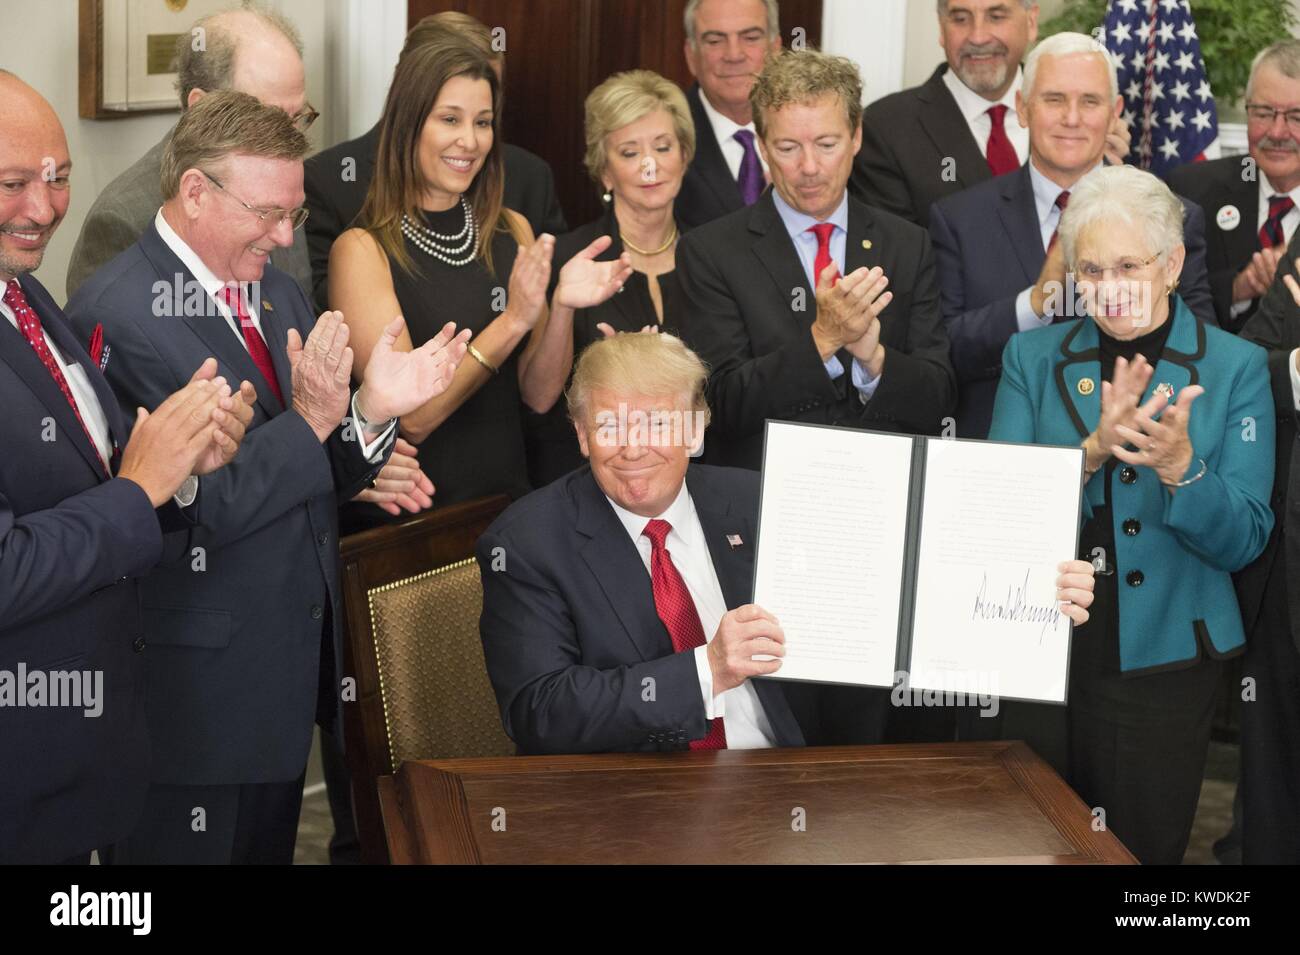 President Donald Trump signs the Executive Order to Promote Healthcare Choice and Competition. Oct. 12, 2017. The order allows American employers to form health insurance groups across state lines (BSLOC 2017 18 168) Stock Photo